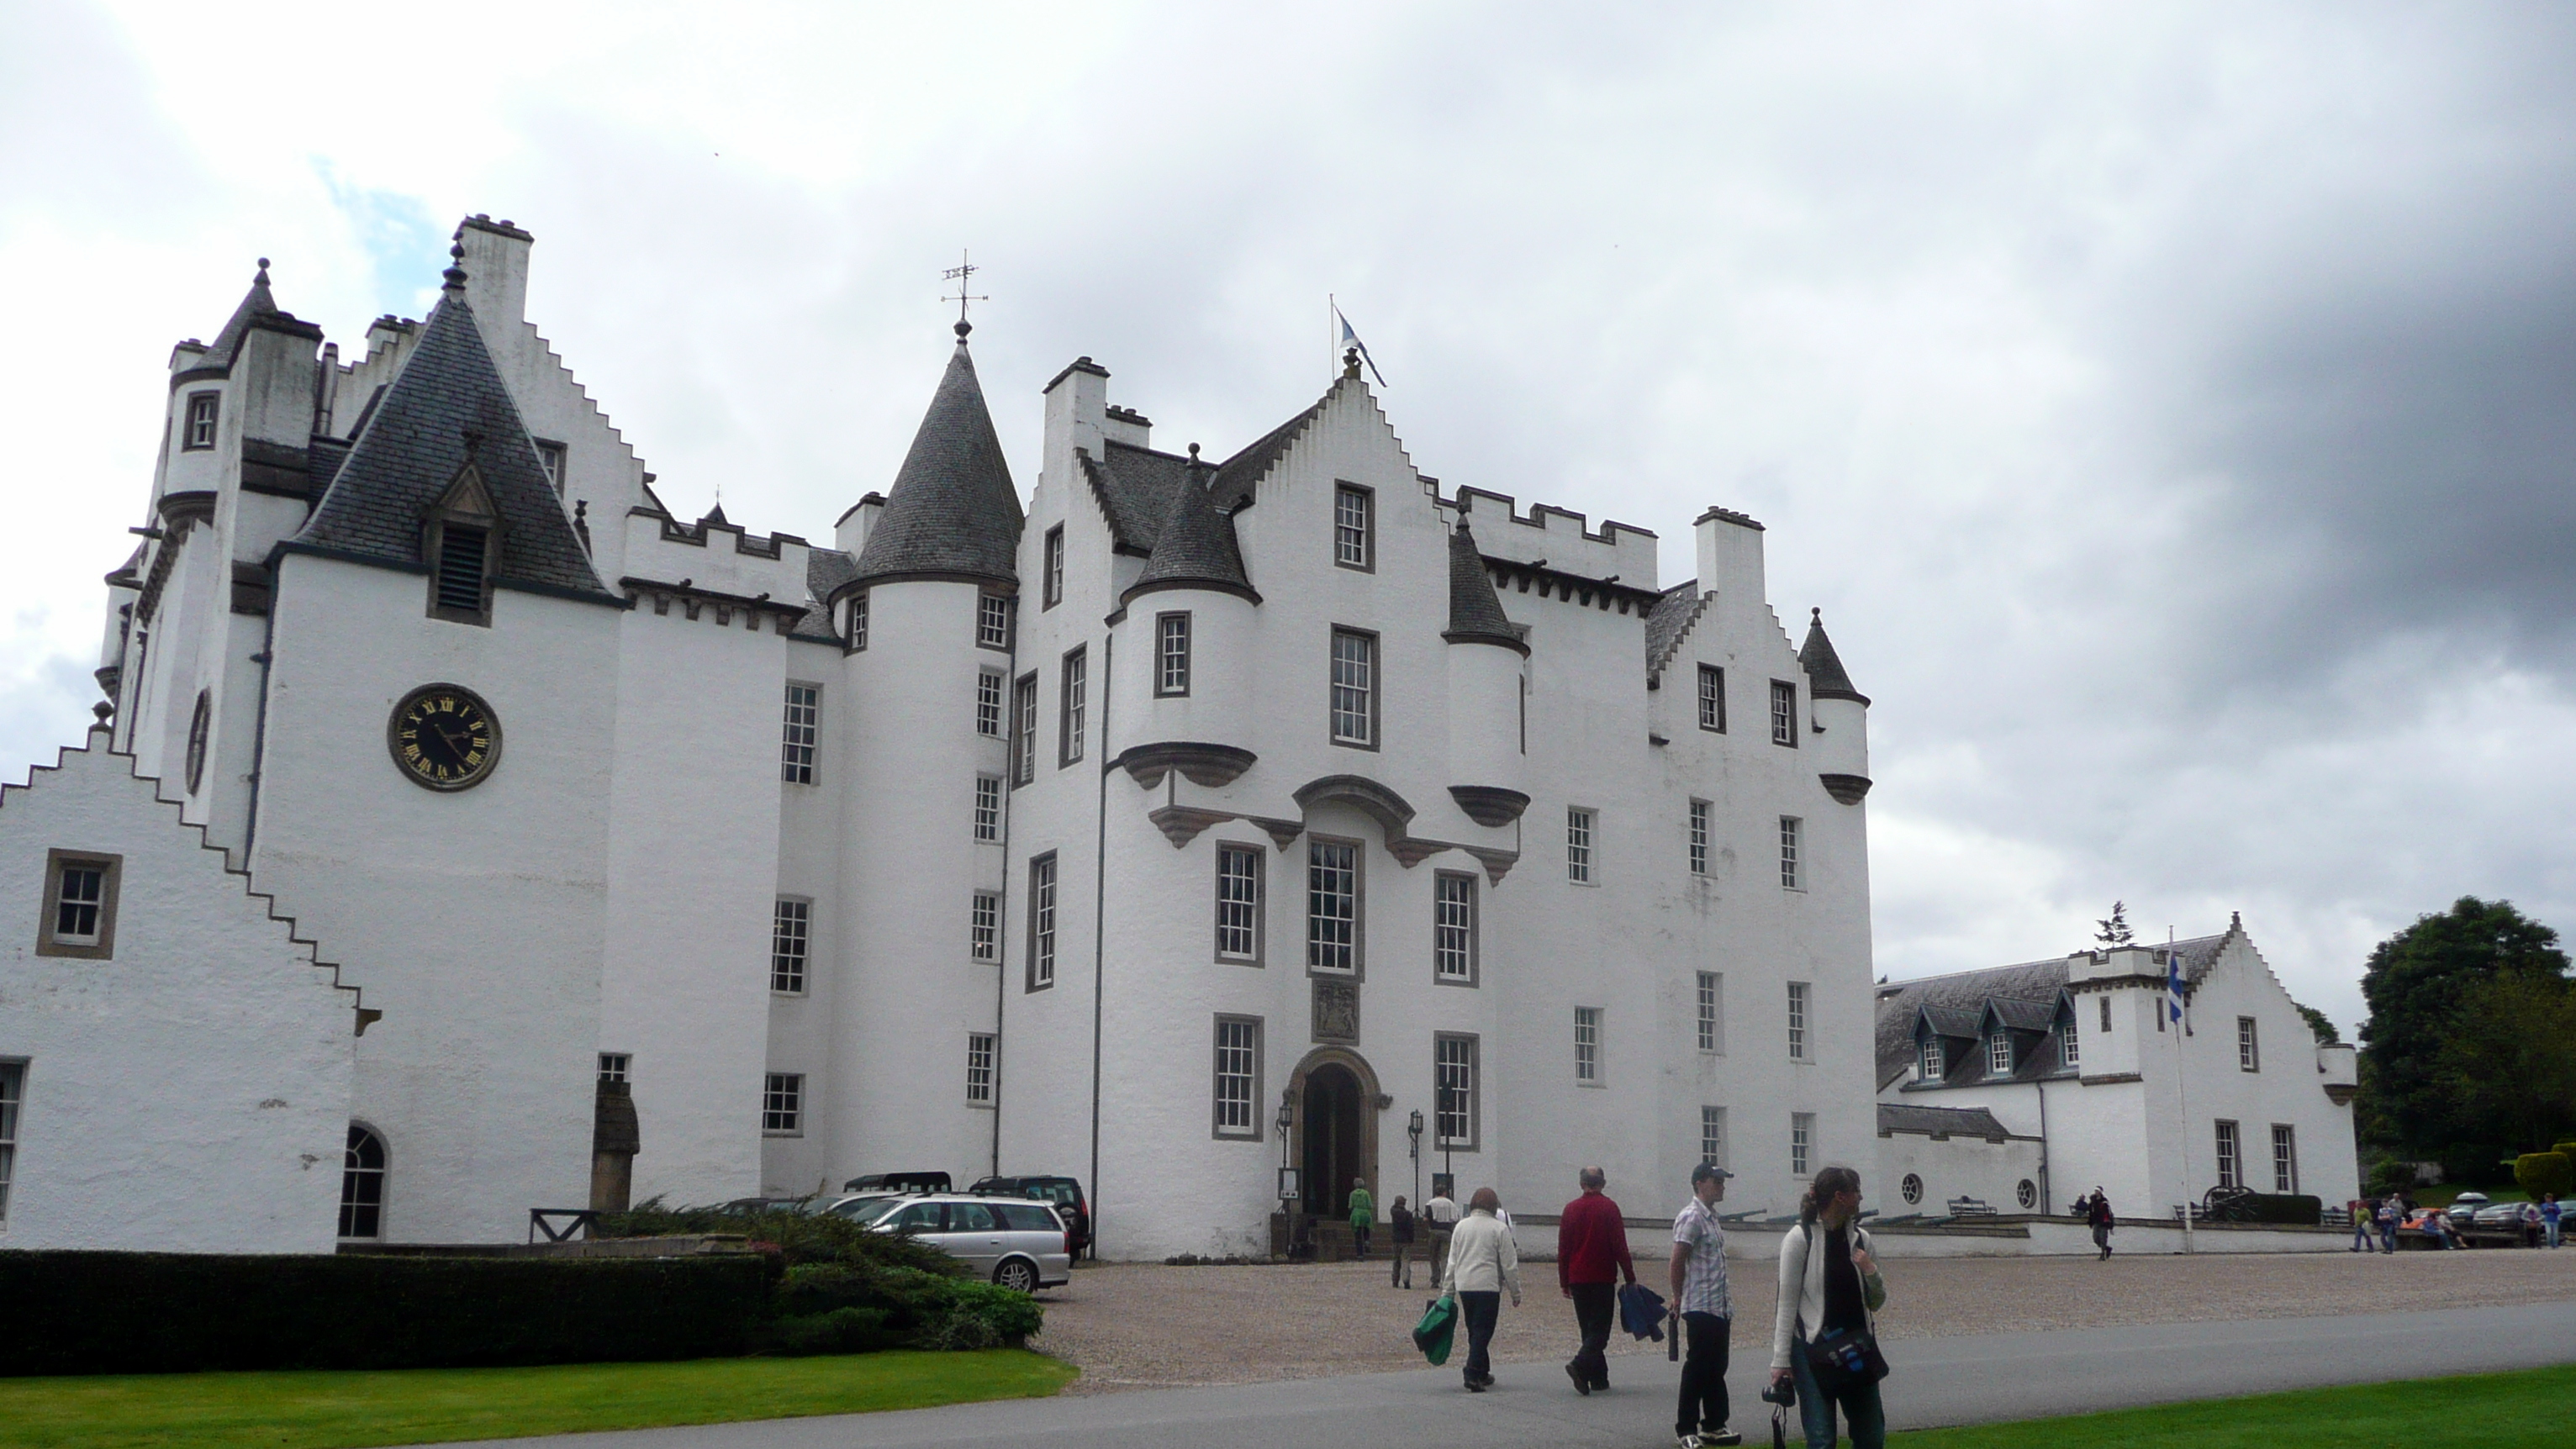 Sharon Campbell and I stopped for lunch at Blair Castle. Alex Beaton always epitomized it as the home of the <q>Atholls</q> who wore <q>Pith Helmetth</q>. (2008)